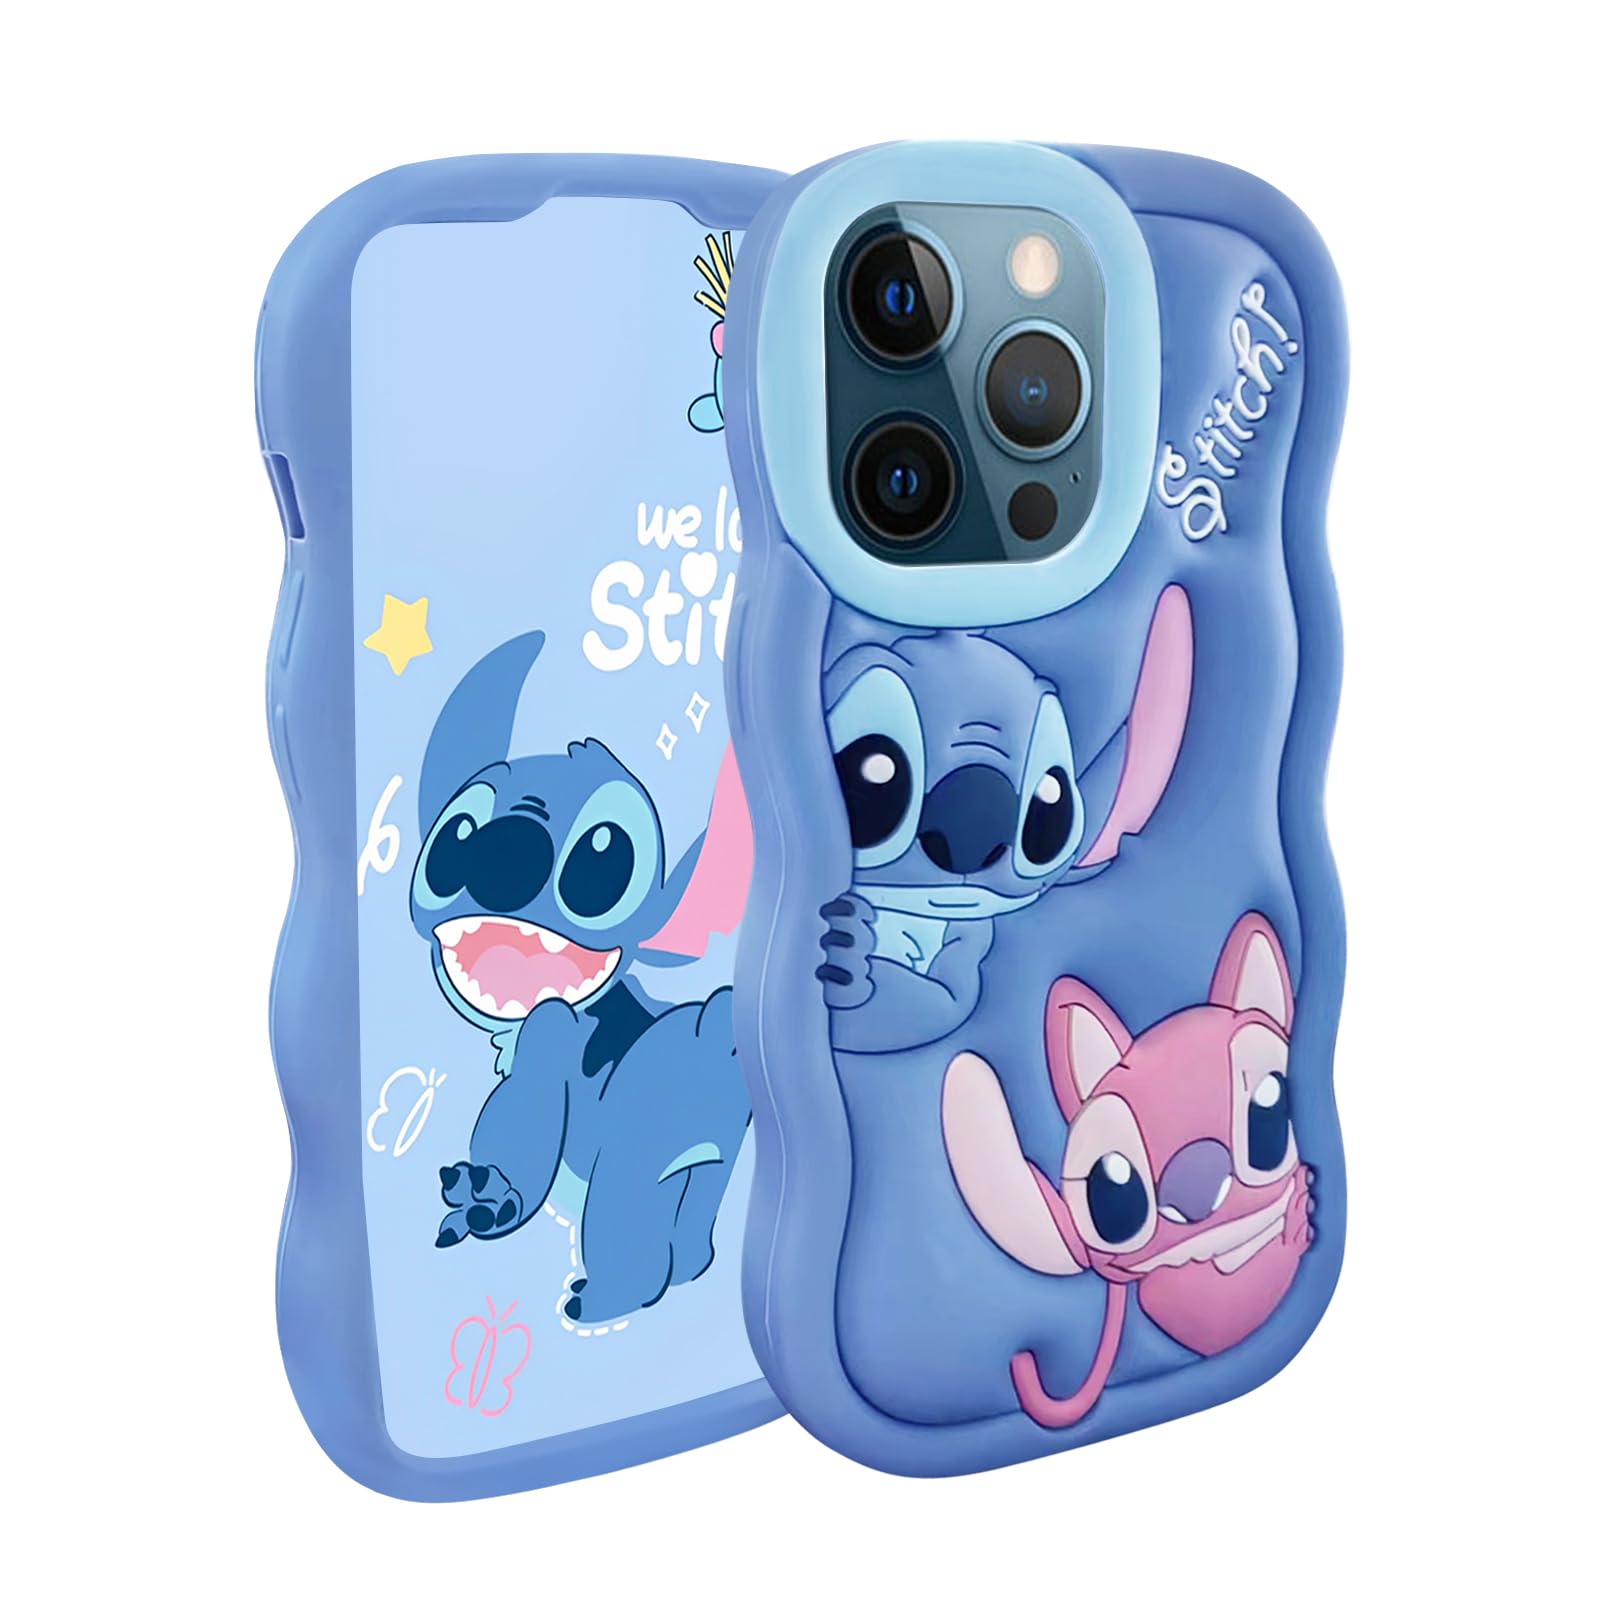 Cases for iPhone 12 Pro Max Case, Stich Cute 3D Cartoon Unique Soft Silicone Cool Animal Character Anti-Bump Protector Boys Kids Girls Gifts Cover Housing Skin Shell for iPhone 12 Pro Max 6.7”